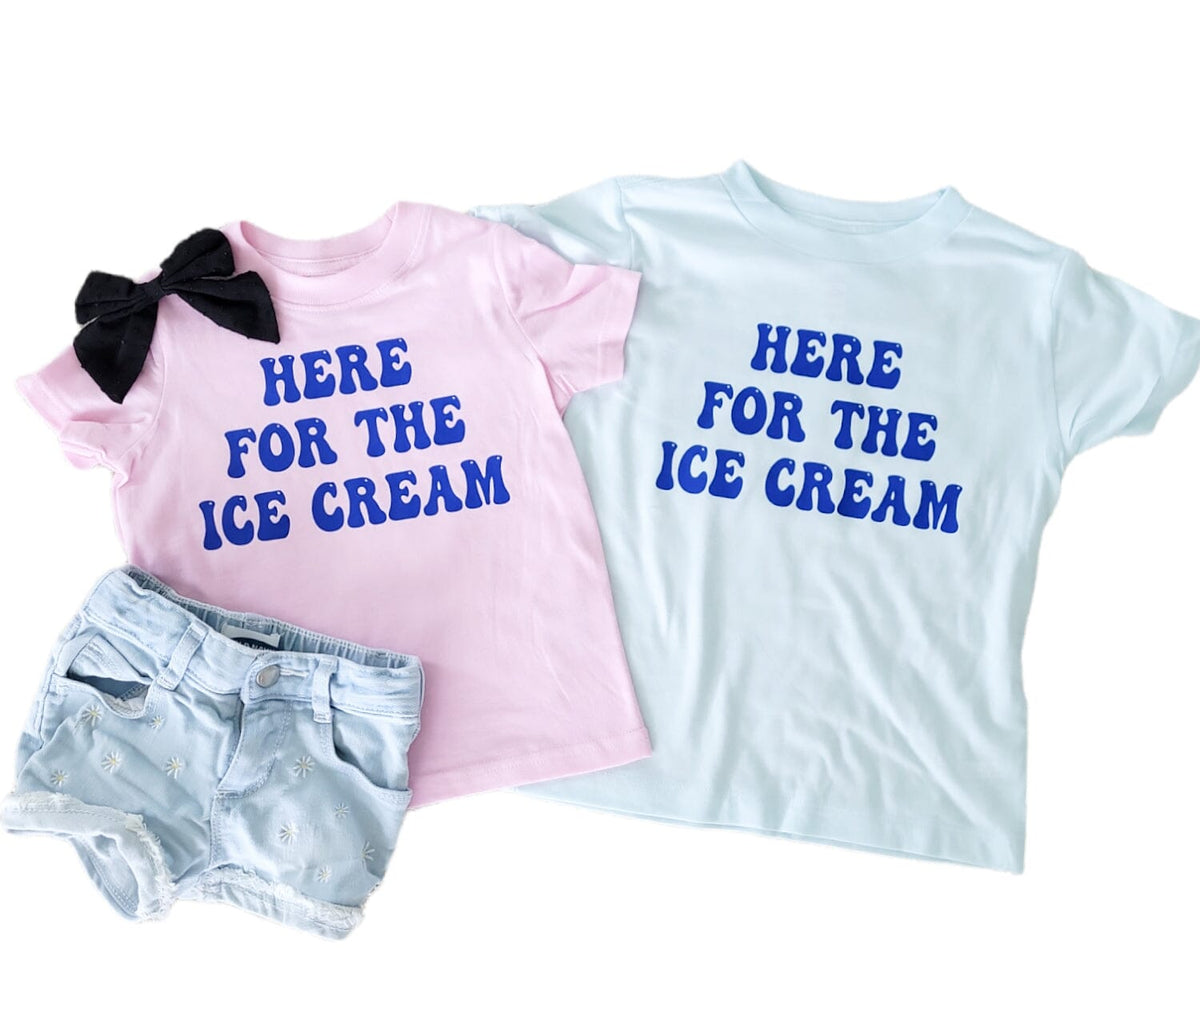 SAMPLE Here For The Ice Cream Tees